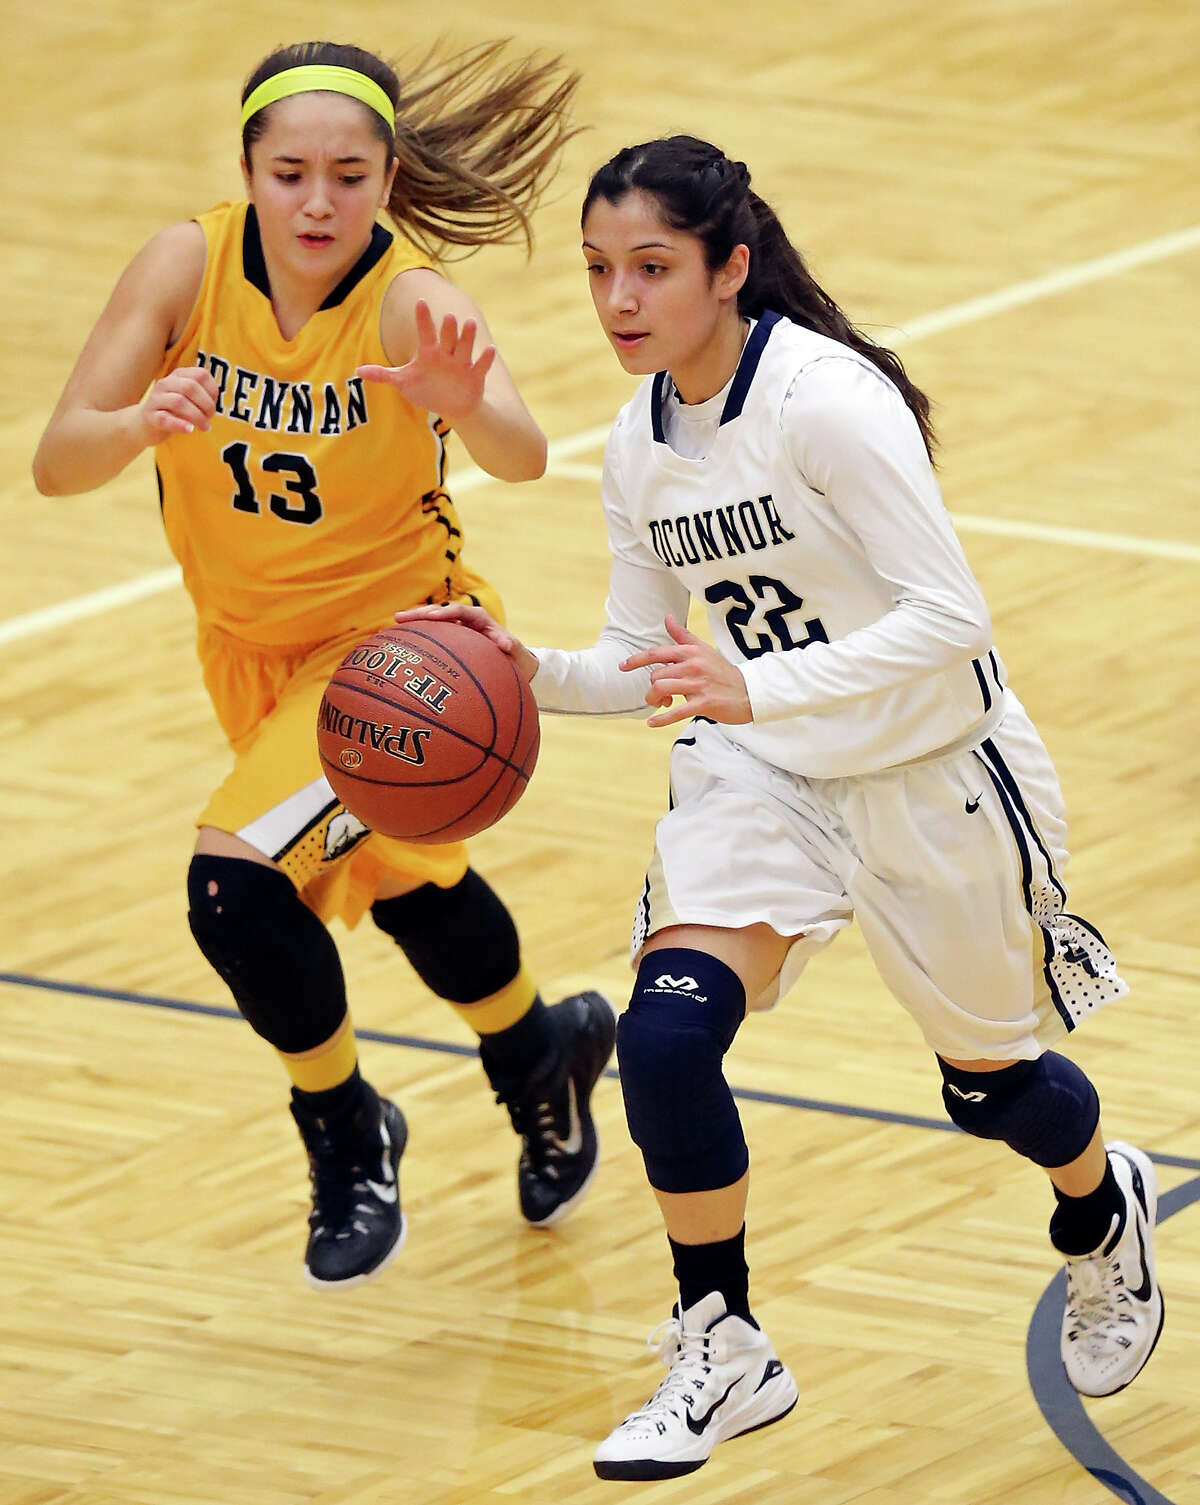 Brennan’s Megan Valdez impressed Southeastern Louisiana University coaches enough during a basketball camp to earn a scholarship offer.